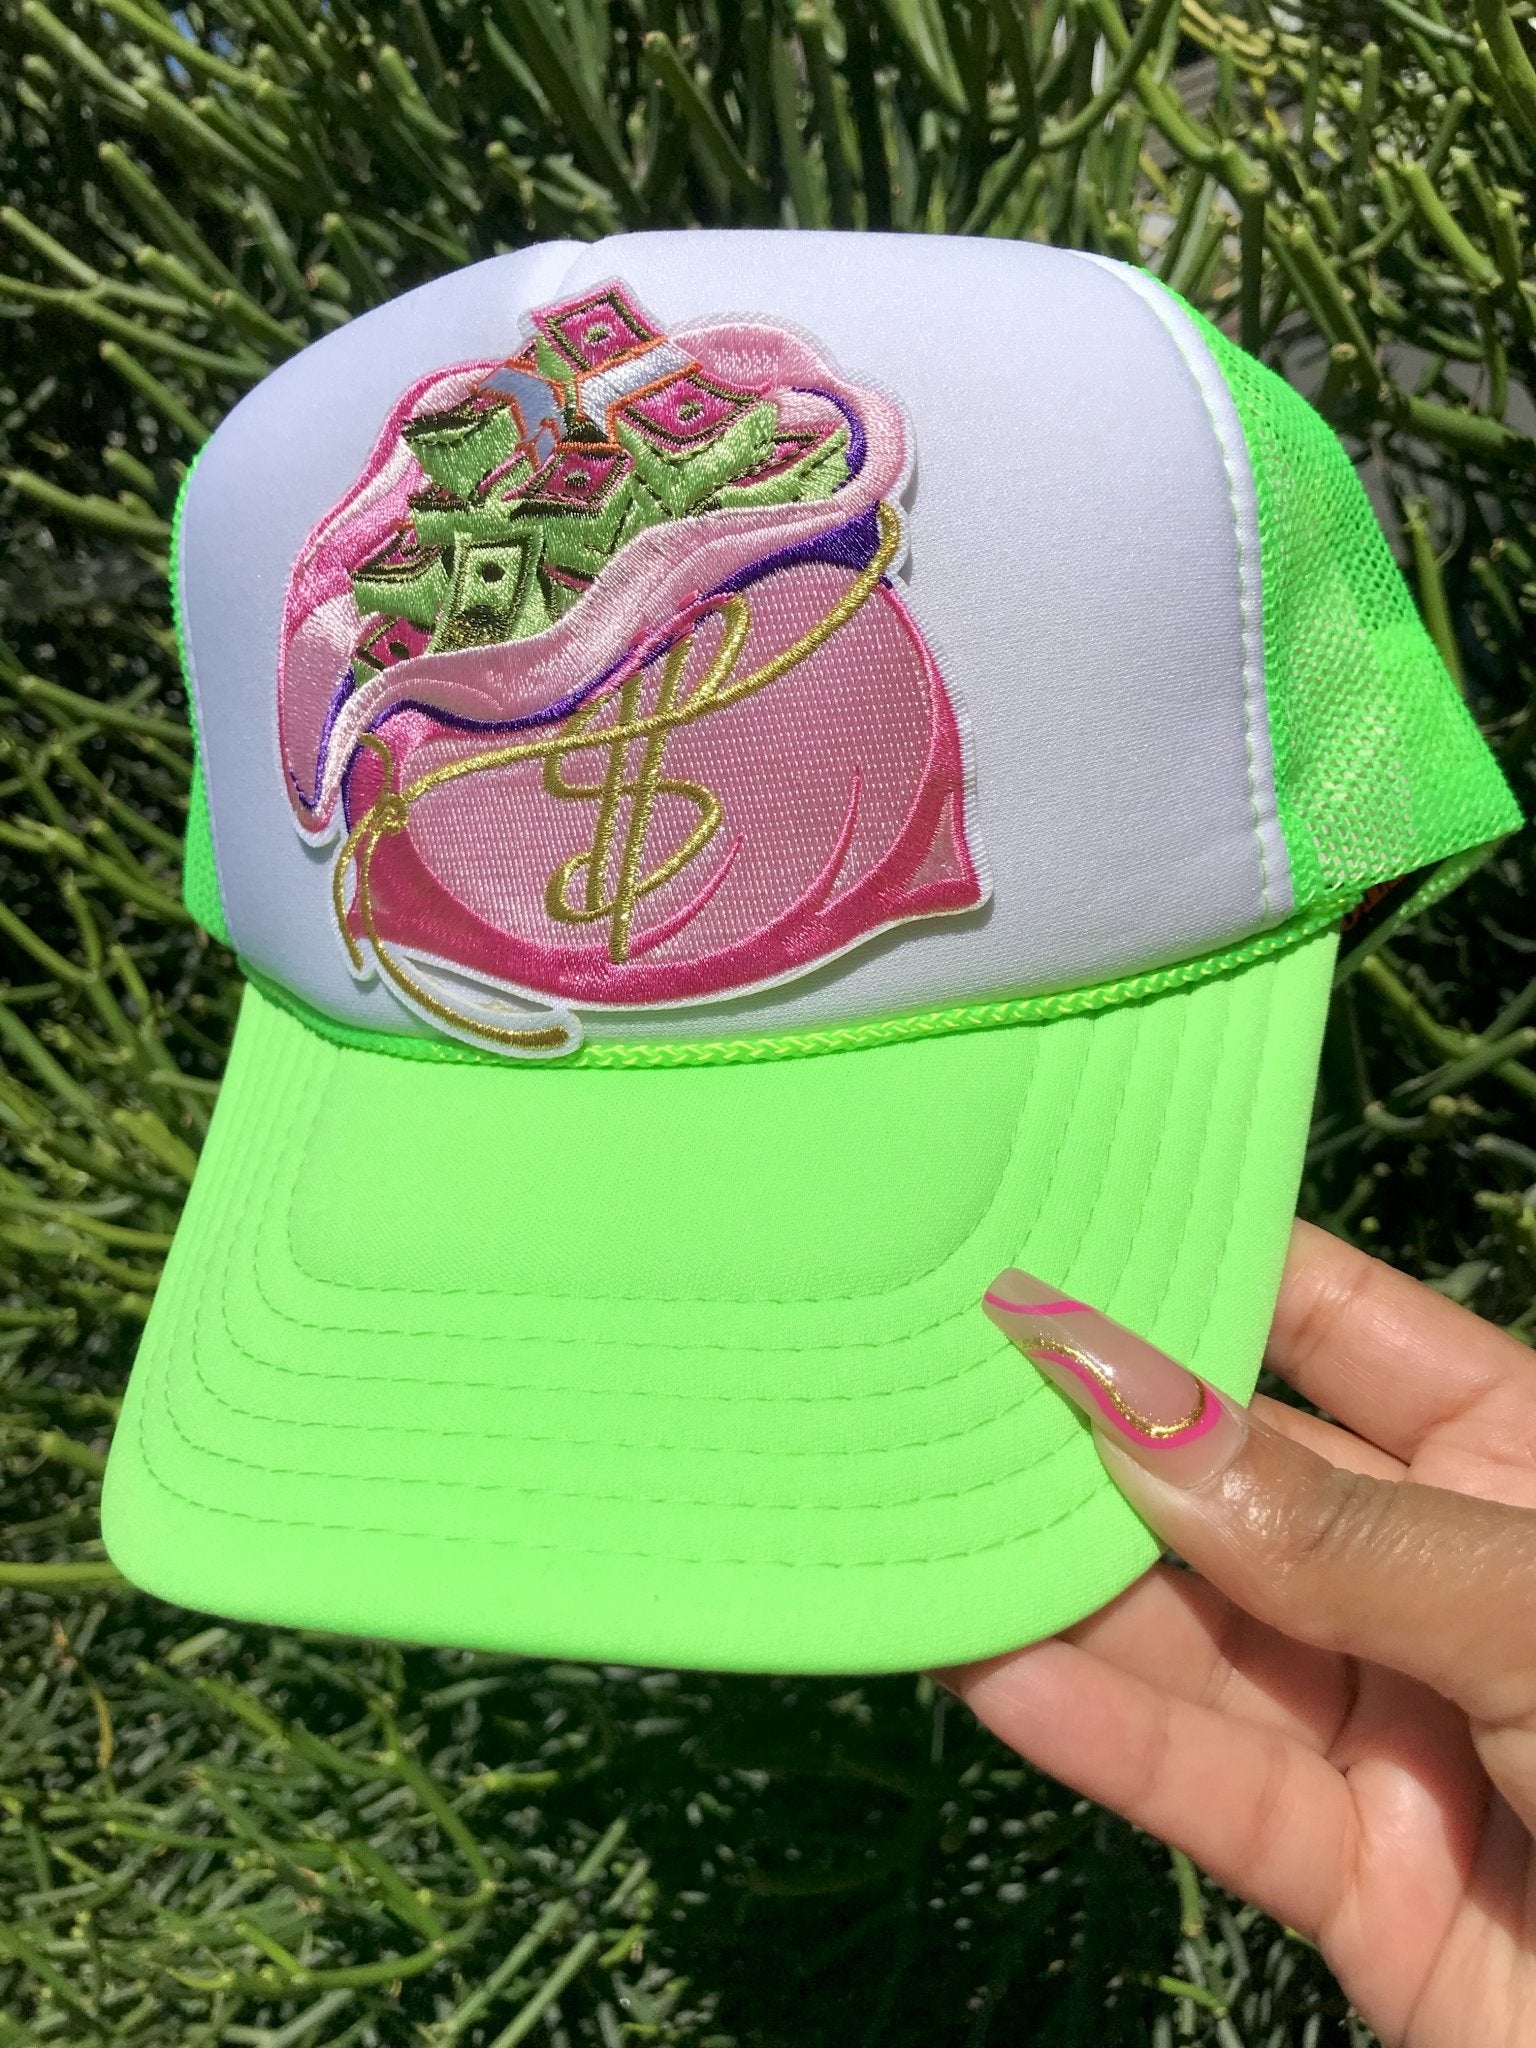 Money Bag Trucker Hat - Ambition Is The New Pink